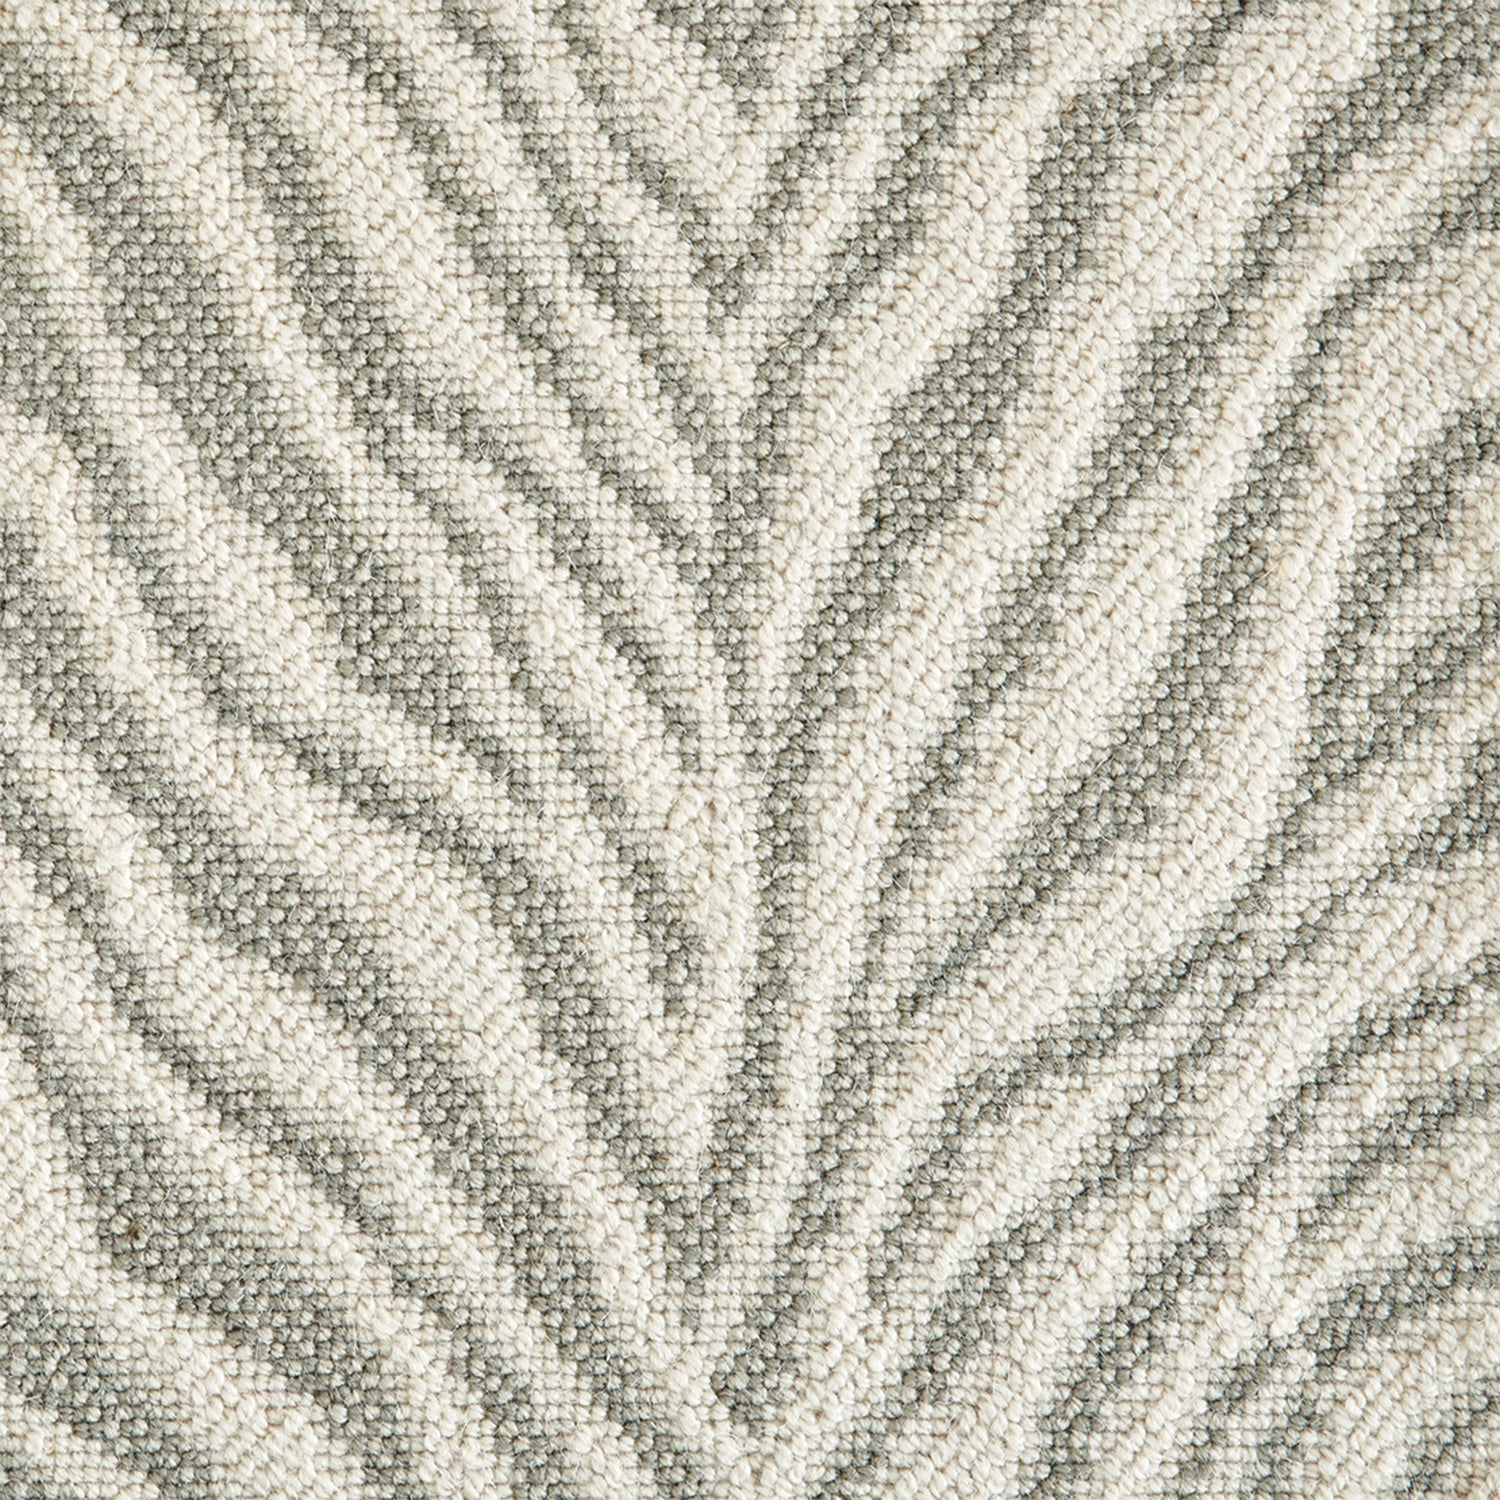 Wool-blend broadloom carpet swatch in an animal print in shades of cream, tan and sage.